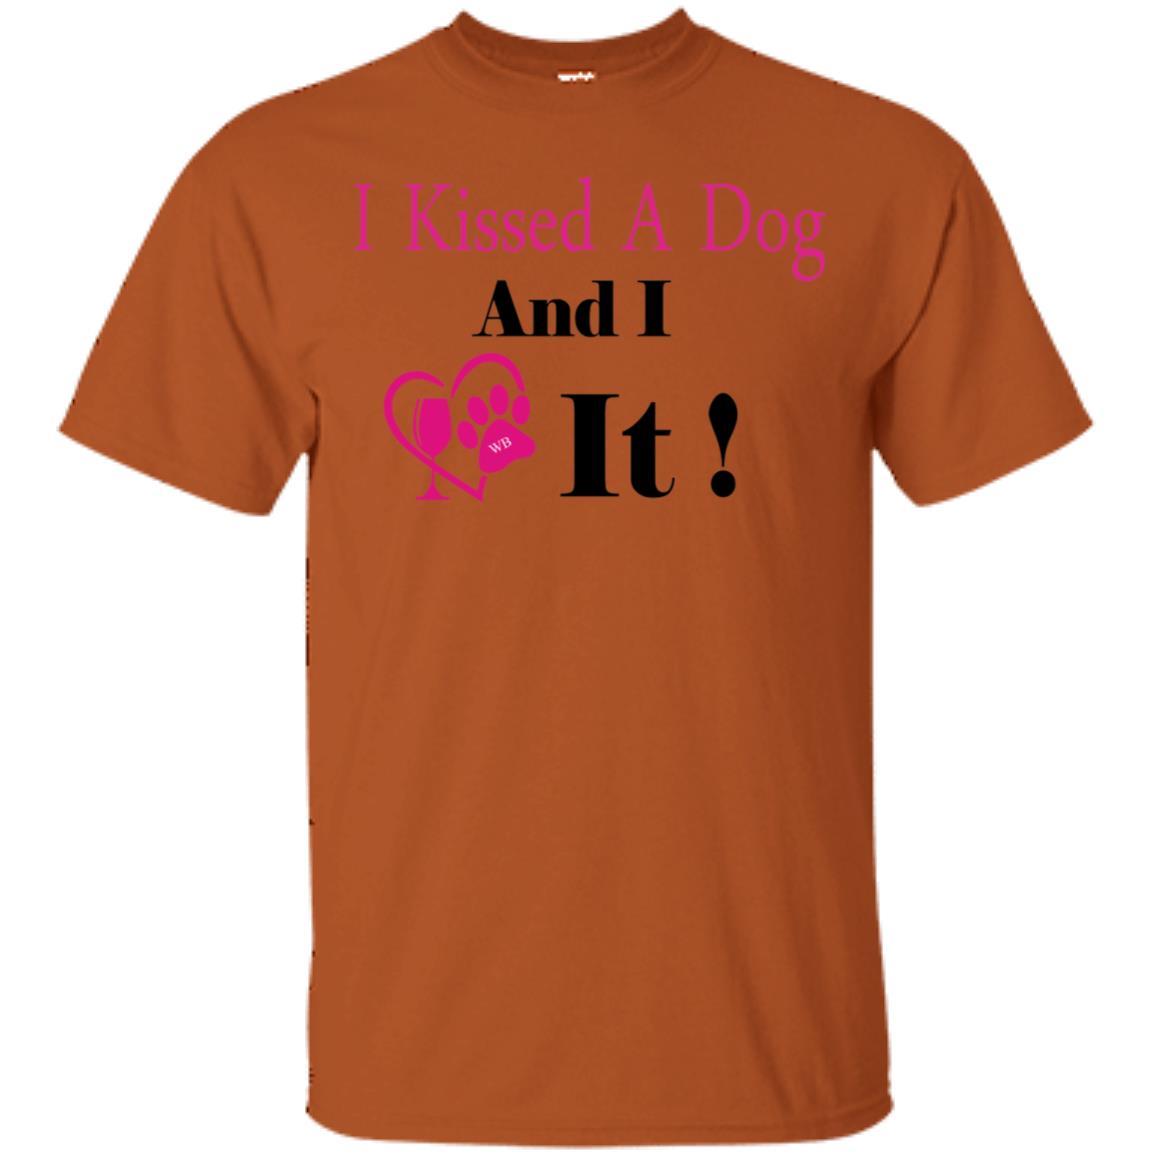 T-Shirts Texas Orange / S WineyBitches.co "I Kissed A Dog And I Loved It:" Ultra Cotton T-Shirt WineyBitchesCo